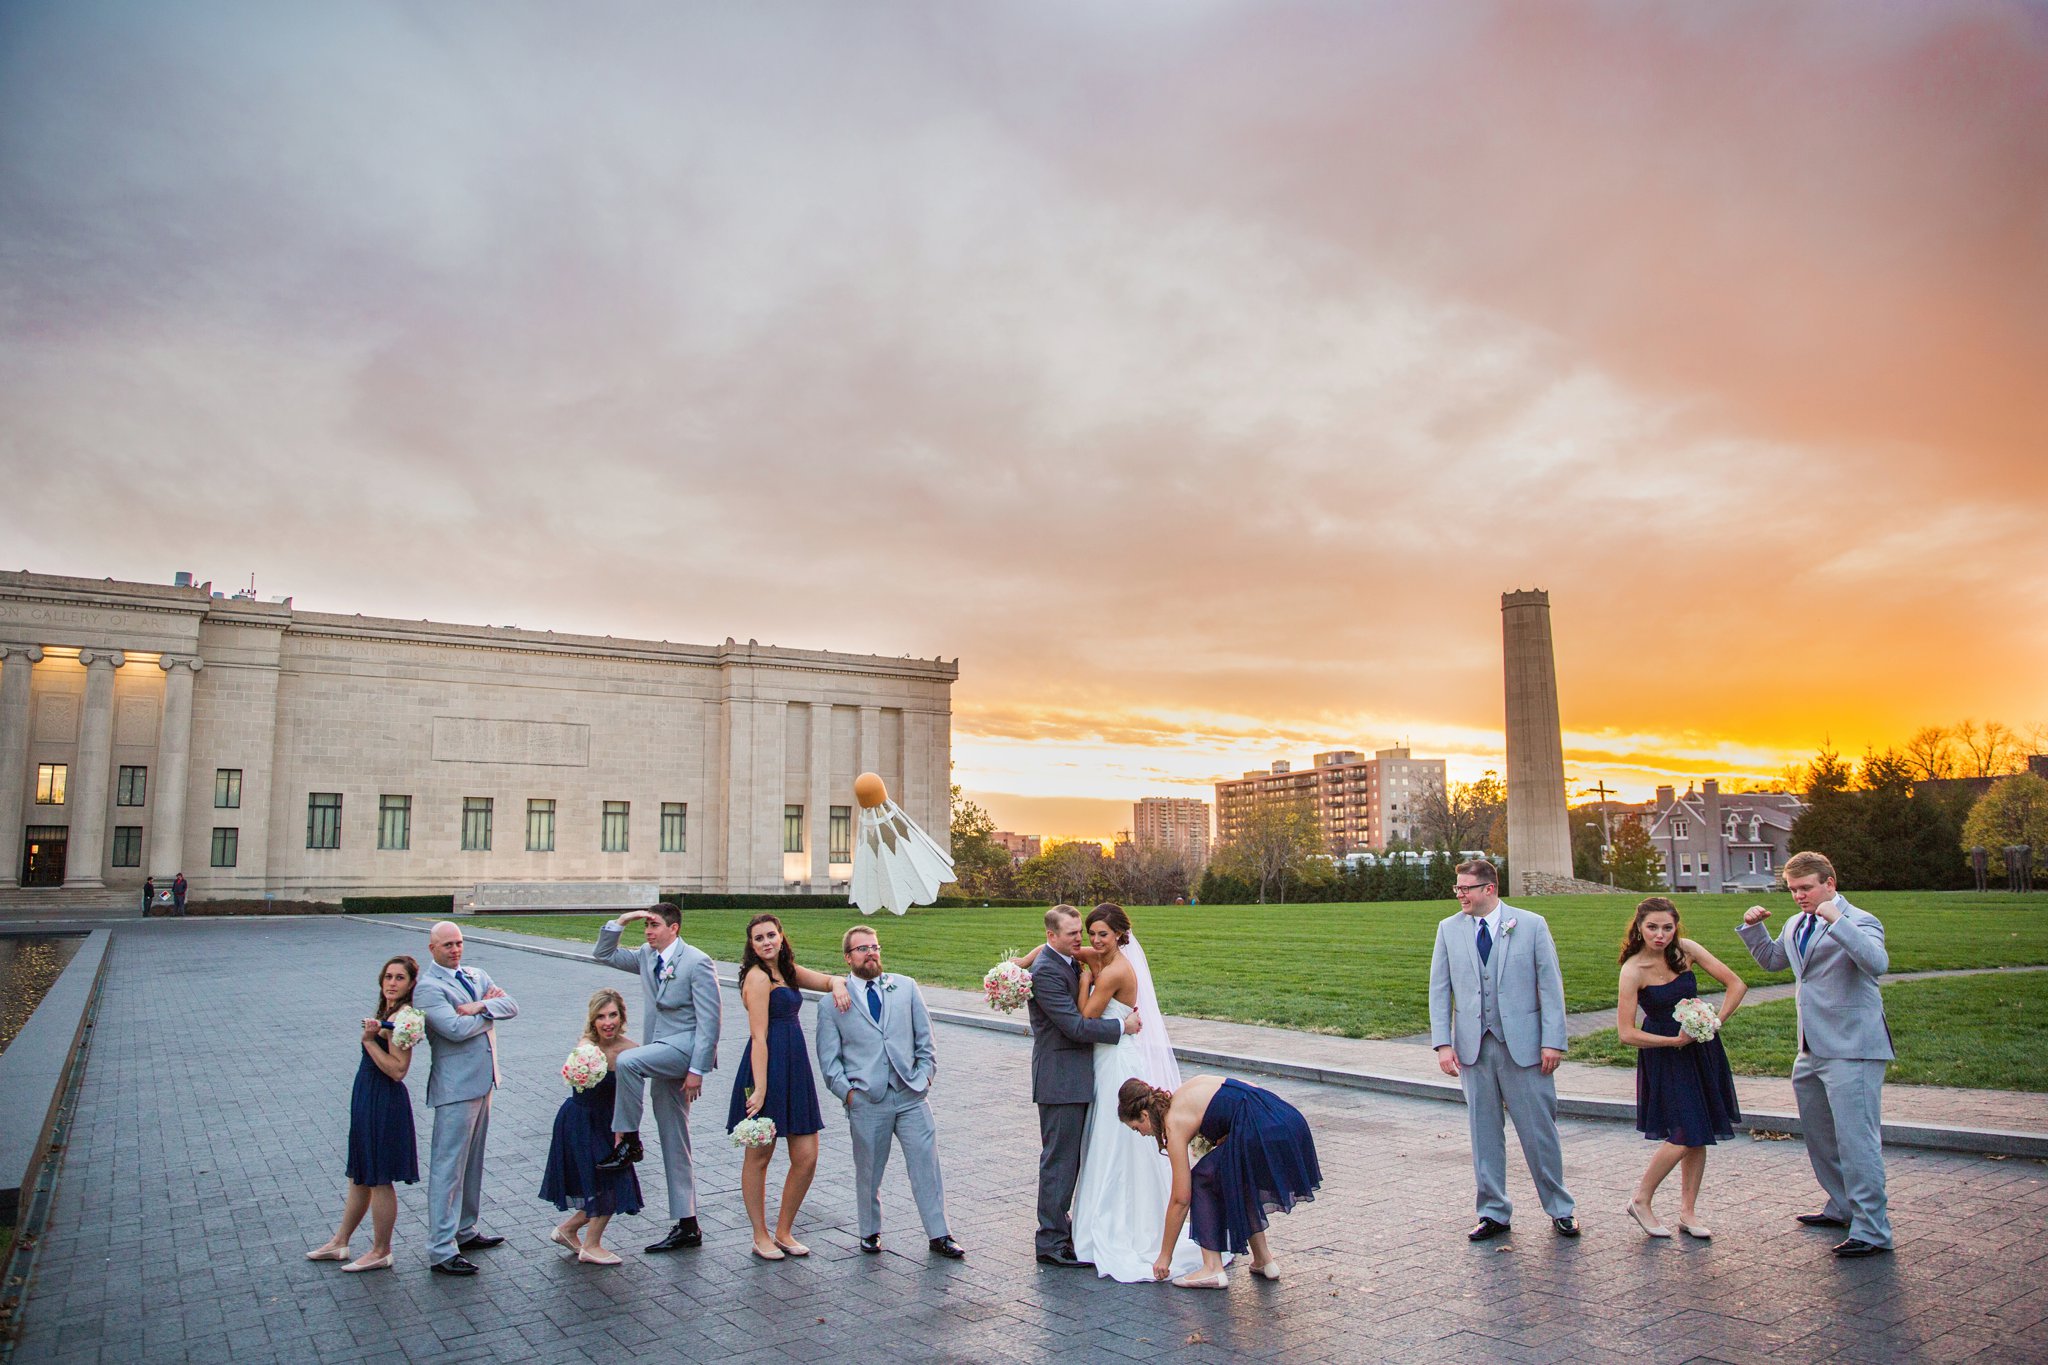 wedding | wedding photos | wedding photography | images by feliciathephotographer.com | Country Club Plaza | Kansas City | Unity Temple | Nelson Atkins Museum of Art | sunset photography | sunset portraits | bridal party portraits | candid | silly poses 